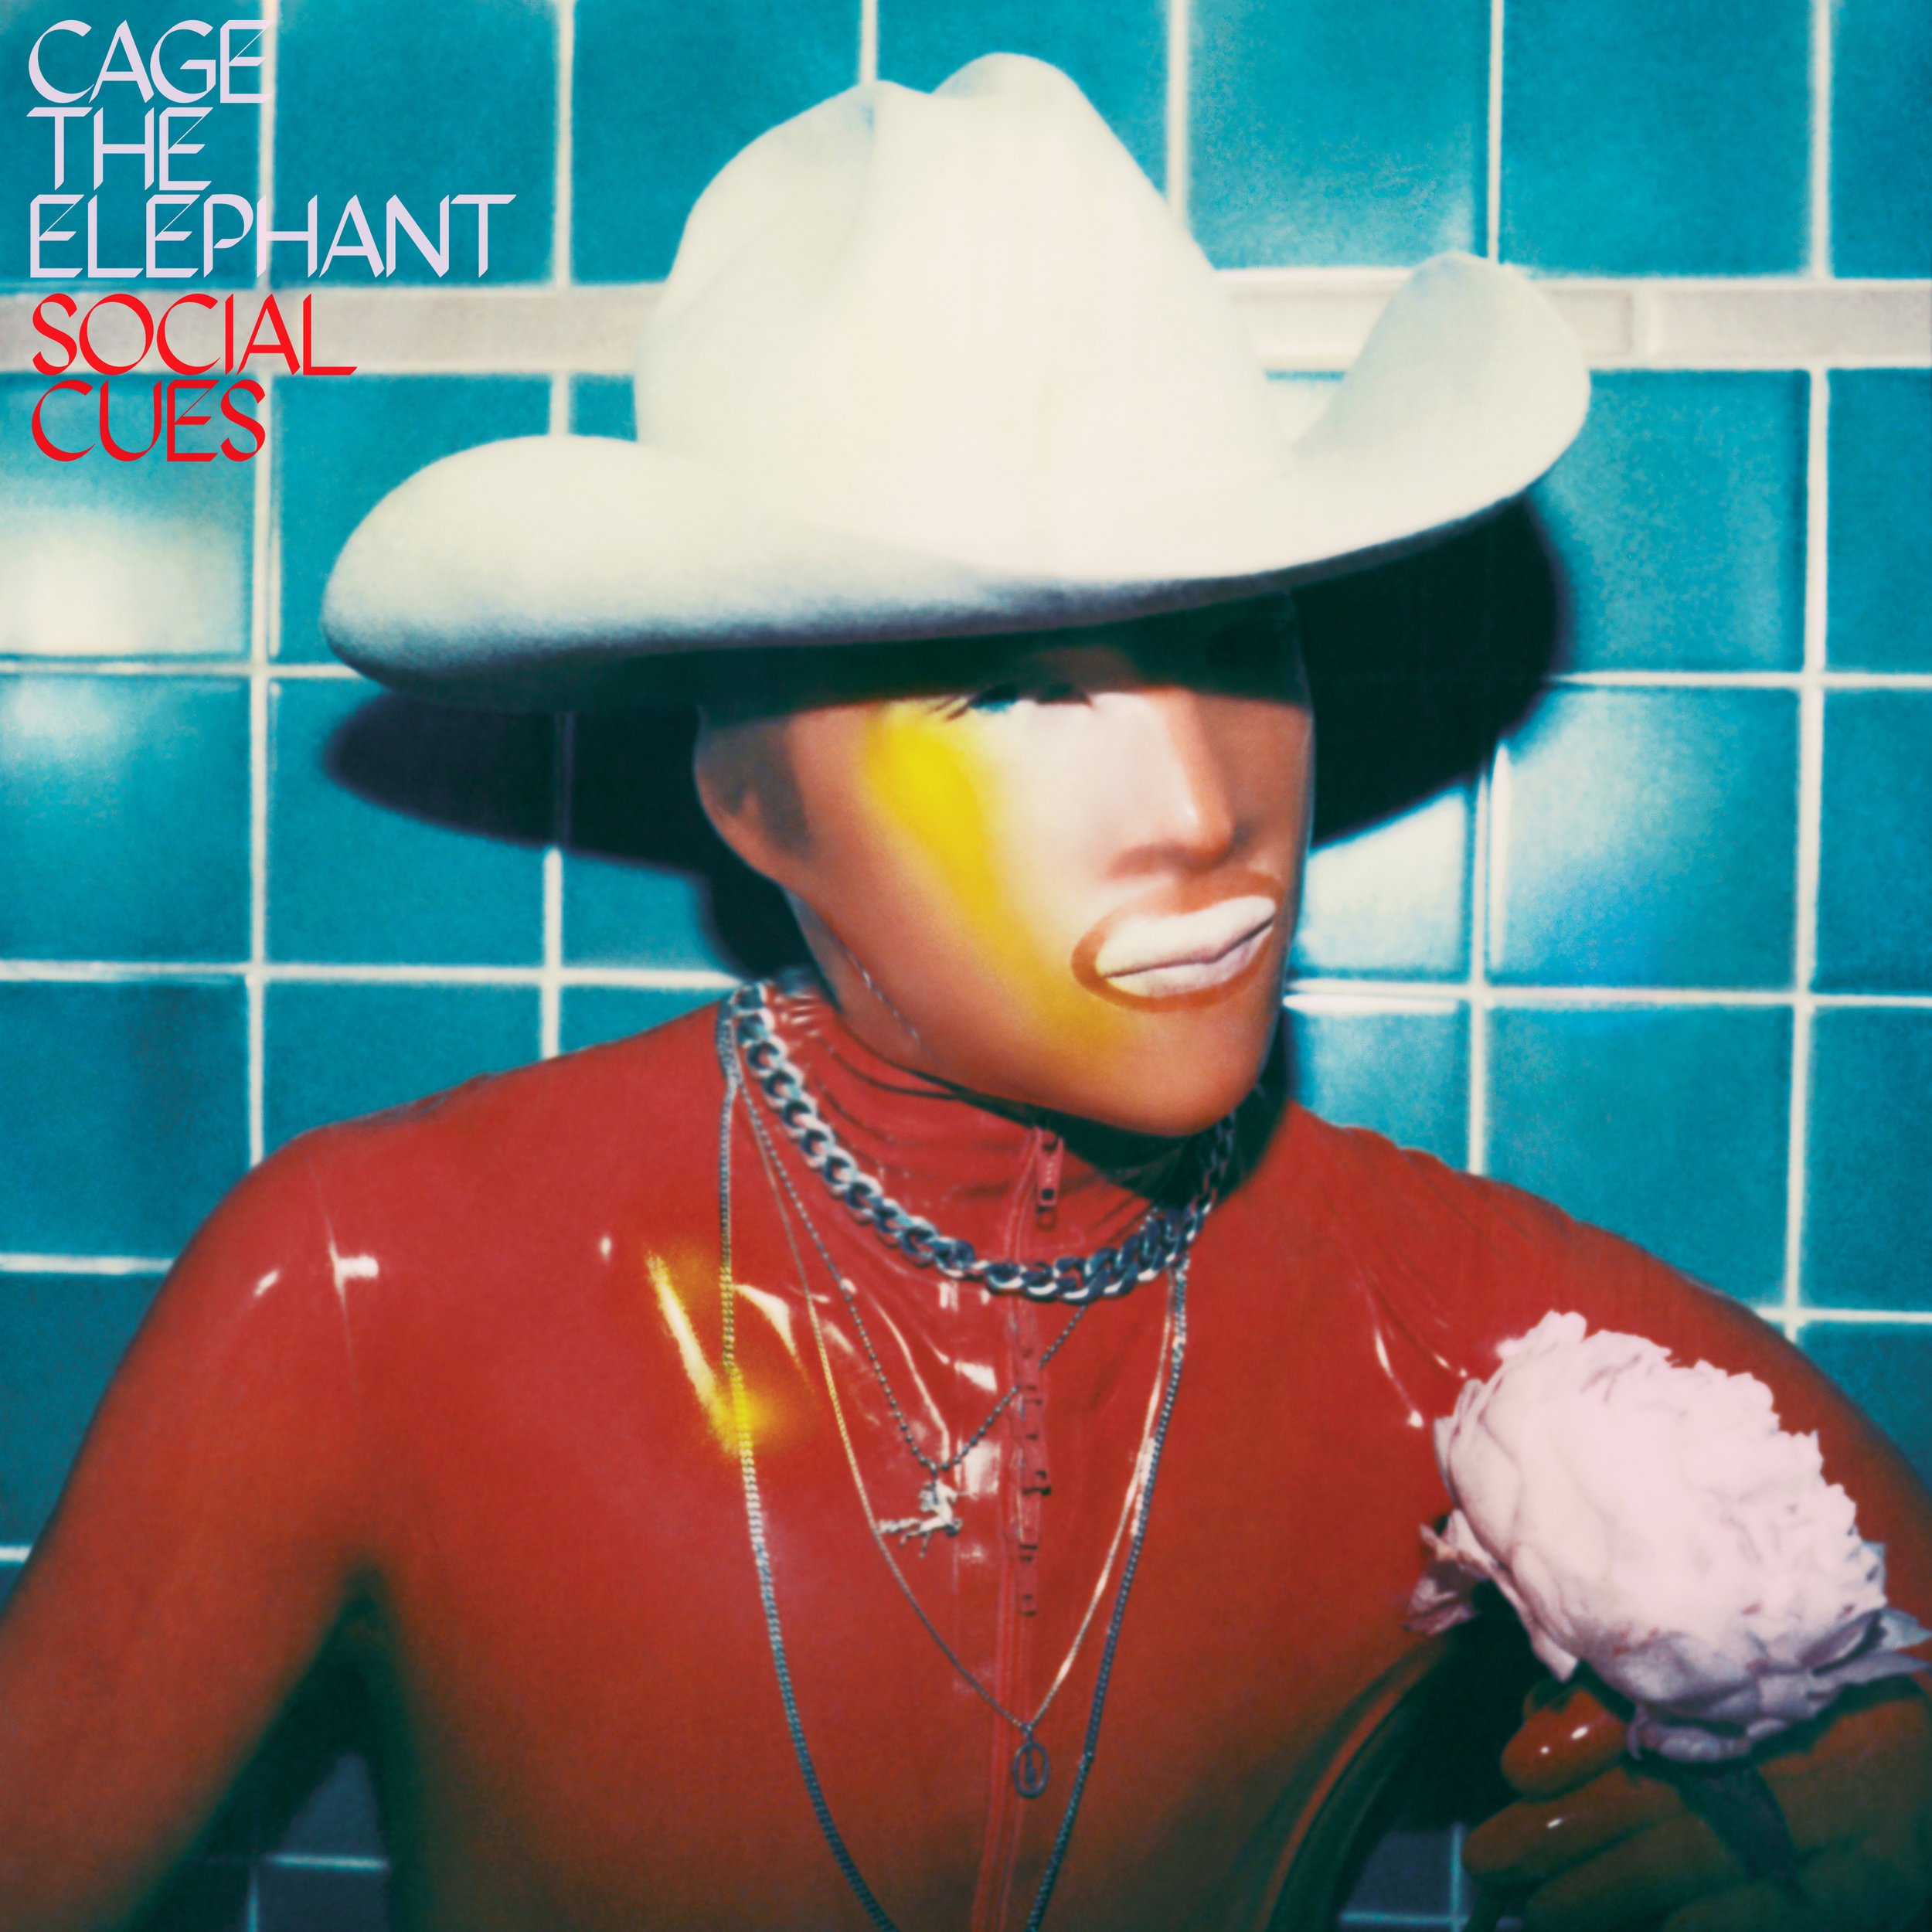 cage-the-elephant-lp+Social+Cues+.jpg